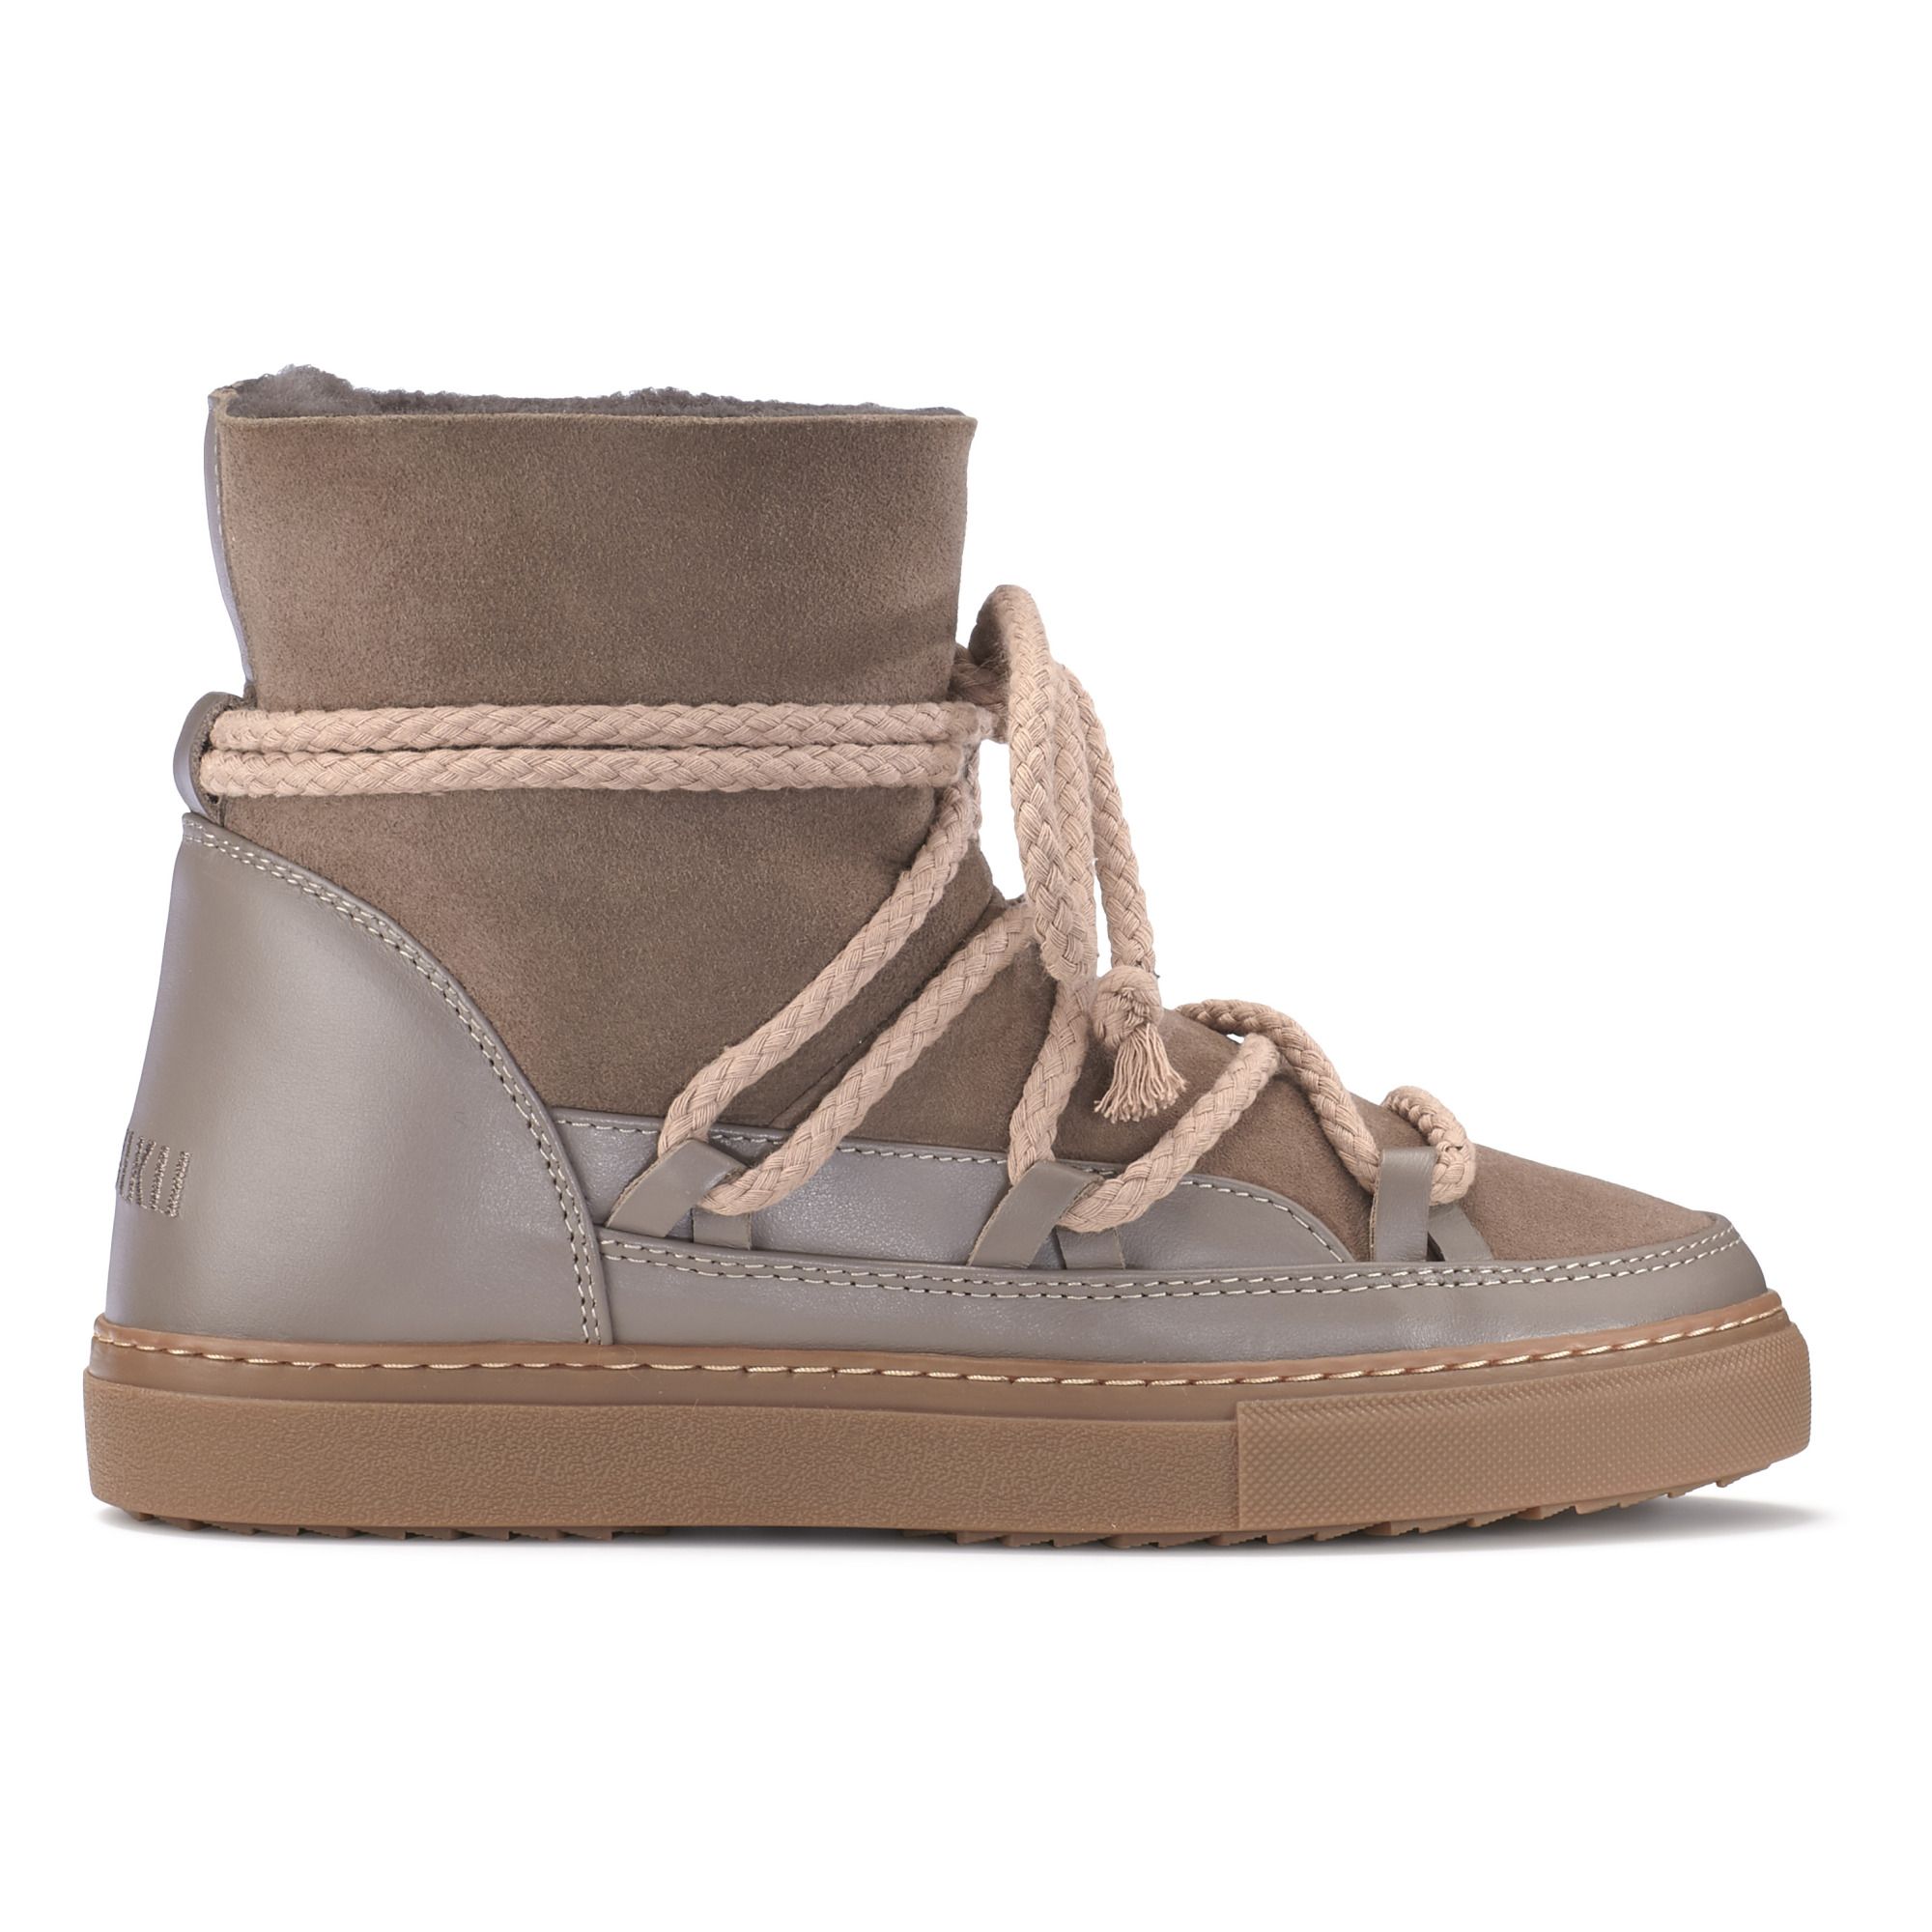 Inuikii - Sneaker Classic - Collection Femme - - Taupe